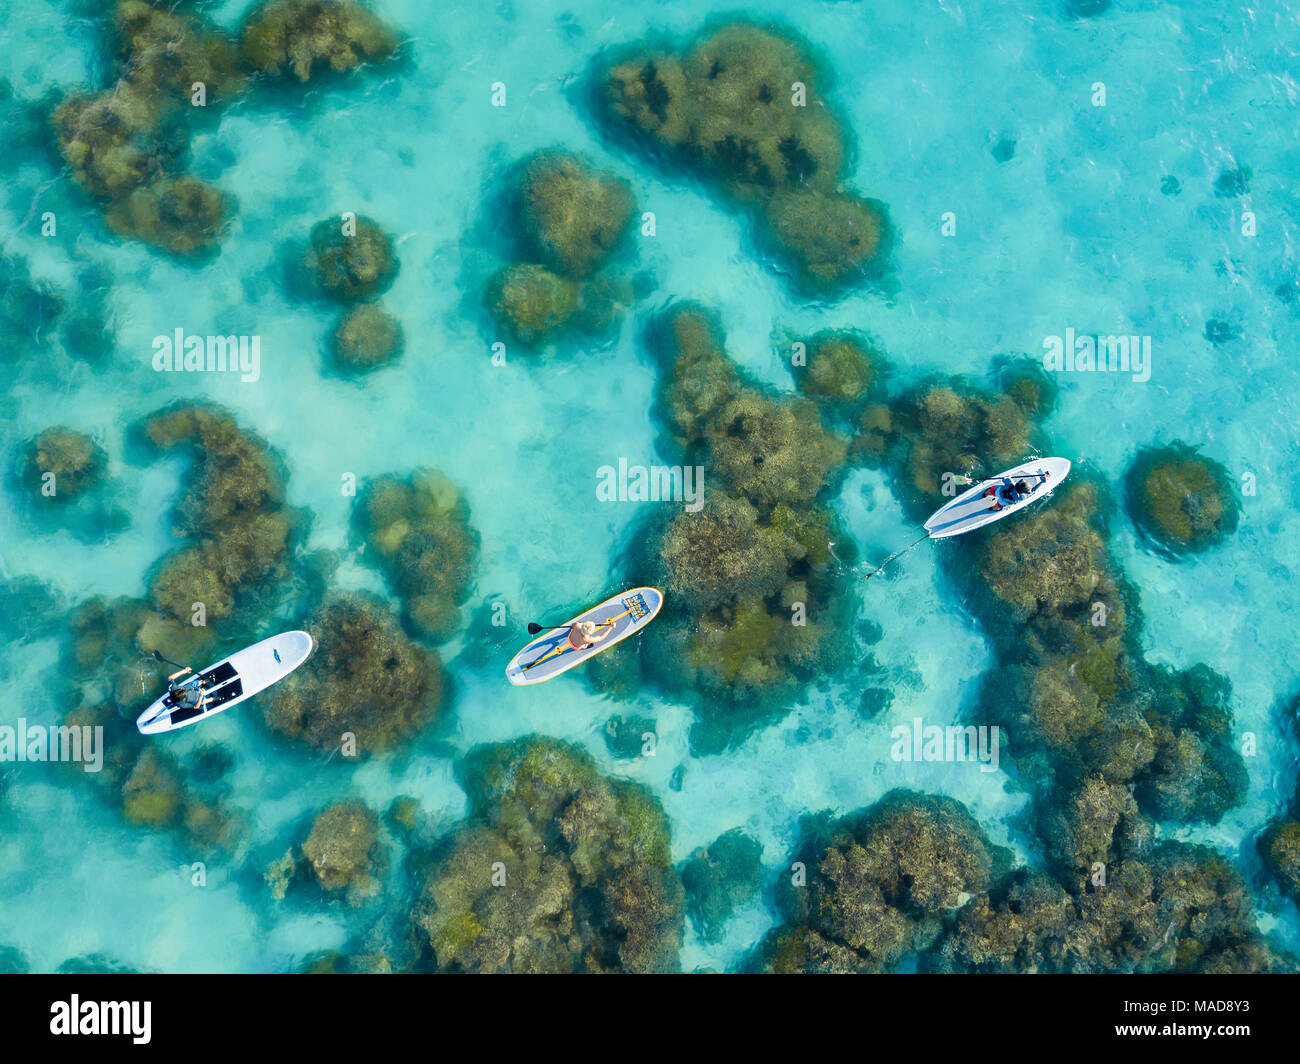 An aerial of people on stand-up paddle boards over the reef on Piti Bay, Guam, Micronesia, Mariana Islands, Pacific Ocean. Stock Photo